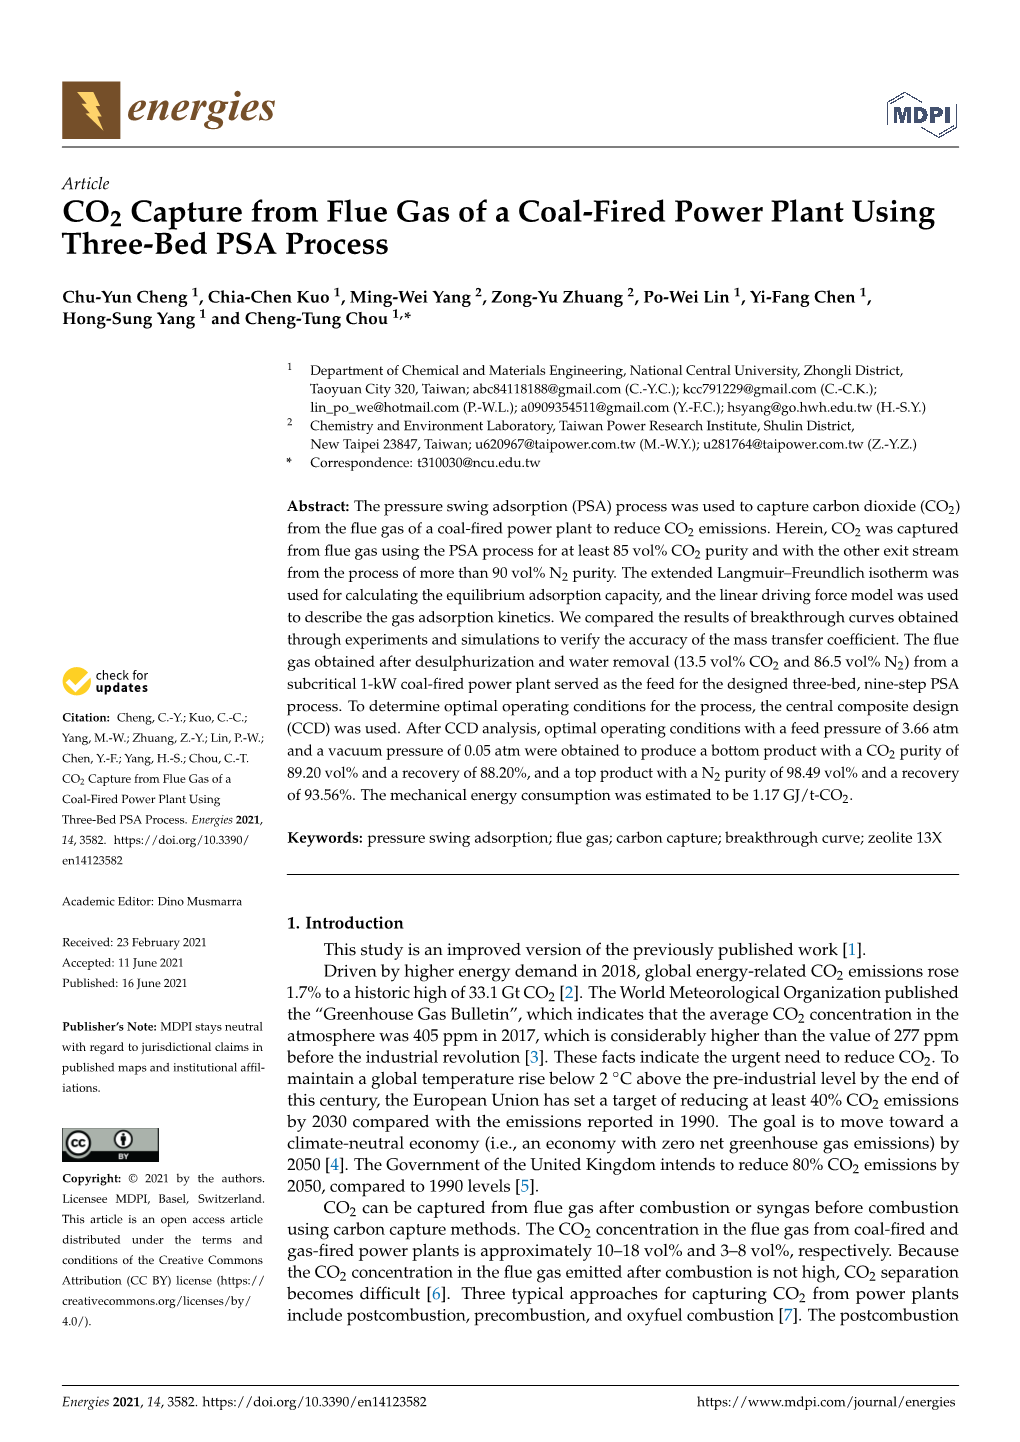 CO2 Capture from Flue Gas of a Coal-Fired Power Plant Using Three-Bed PSA Process